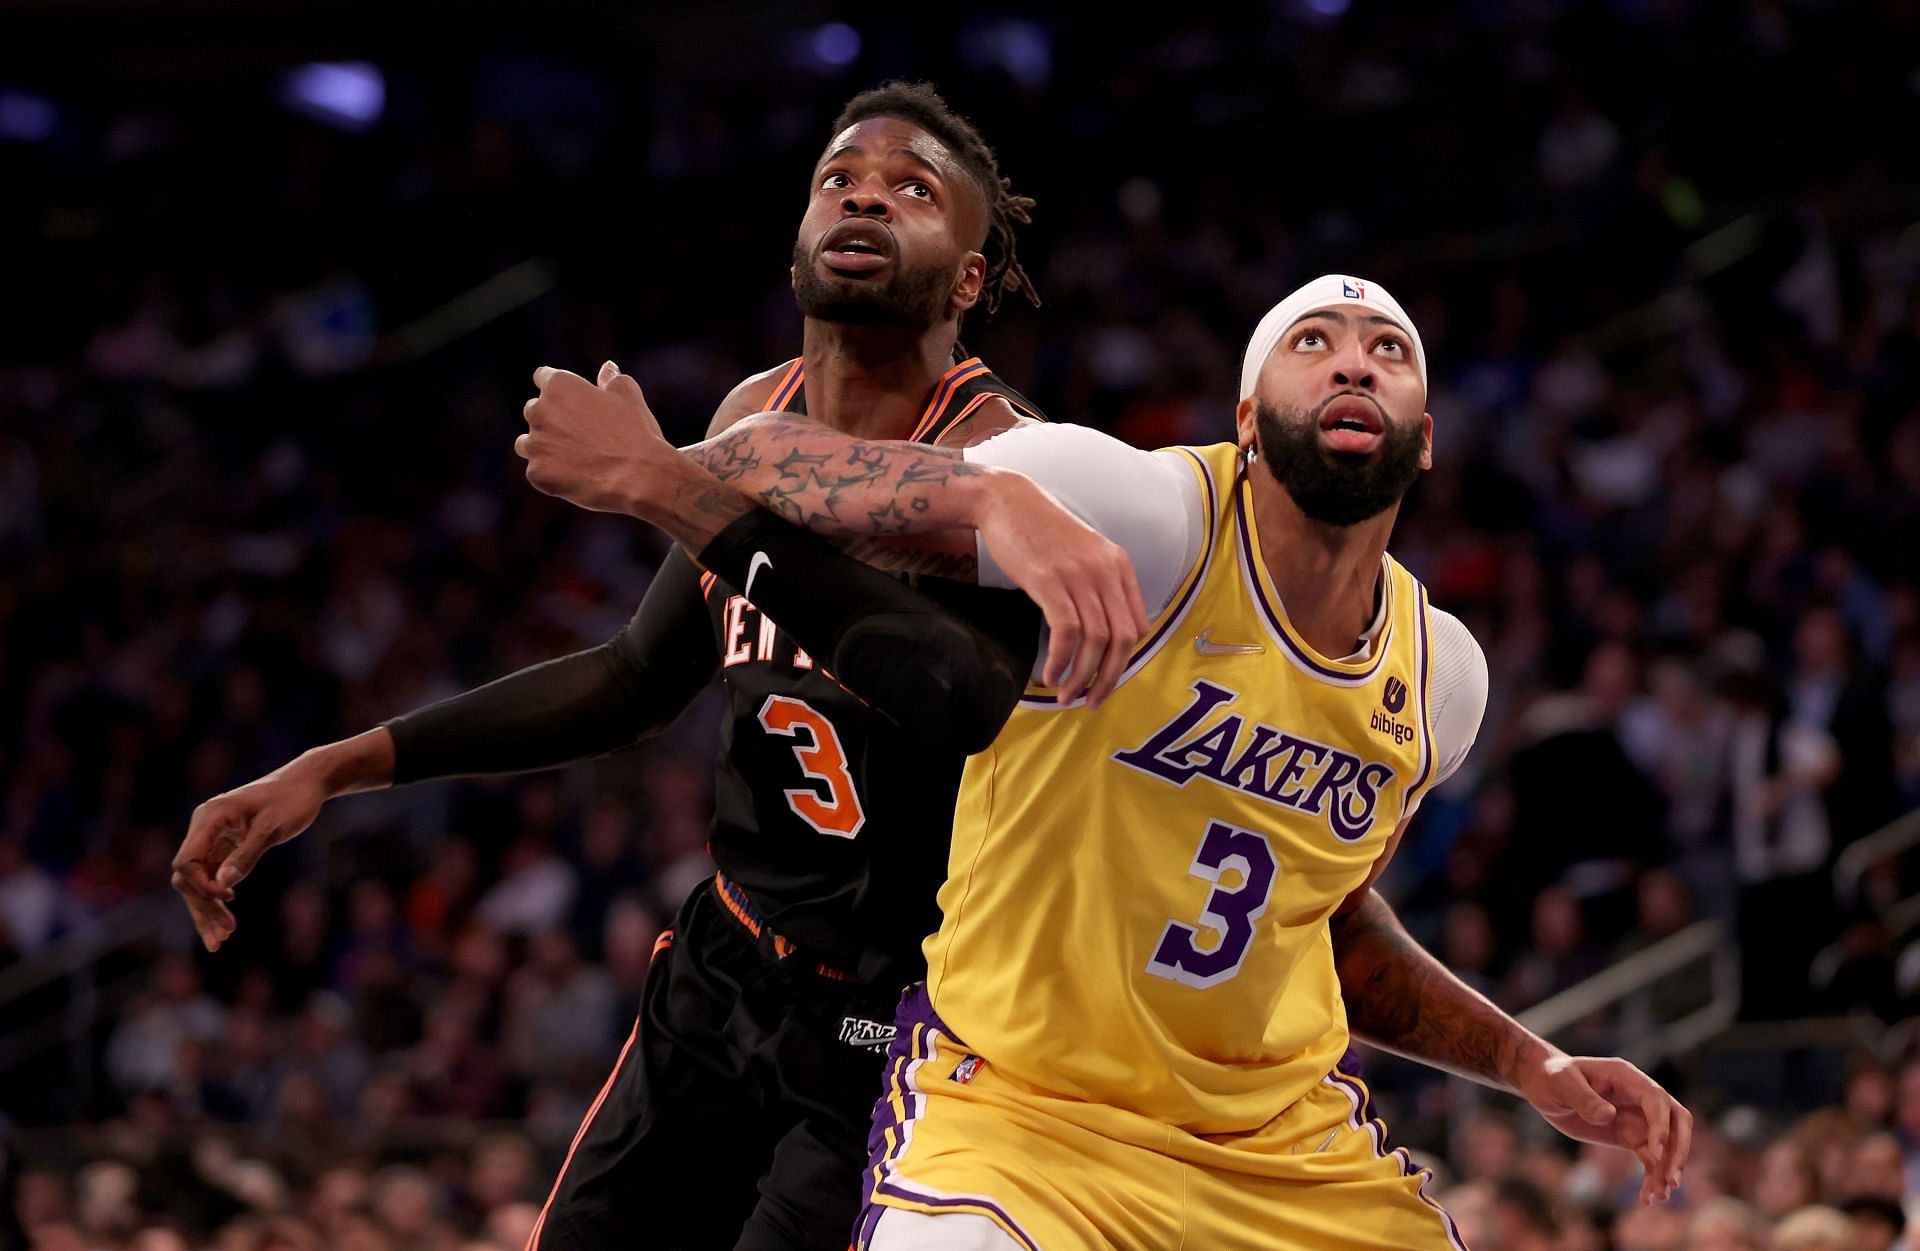 Los Angeles Lakers All-Star Anthony Davis boxing out for a rebound